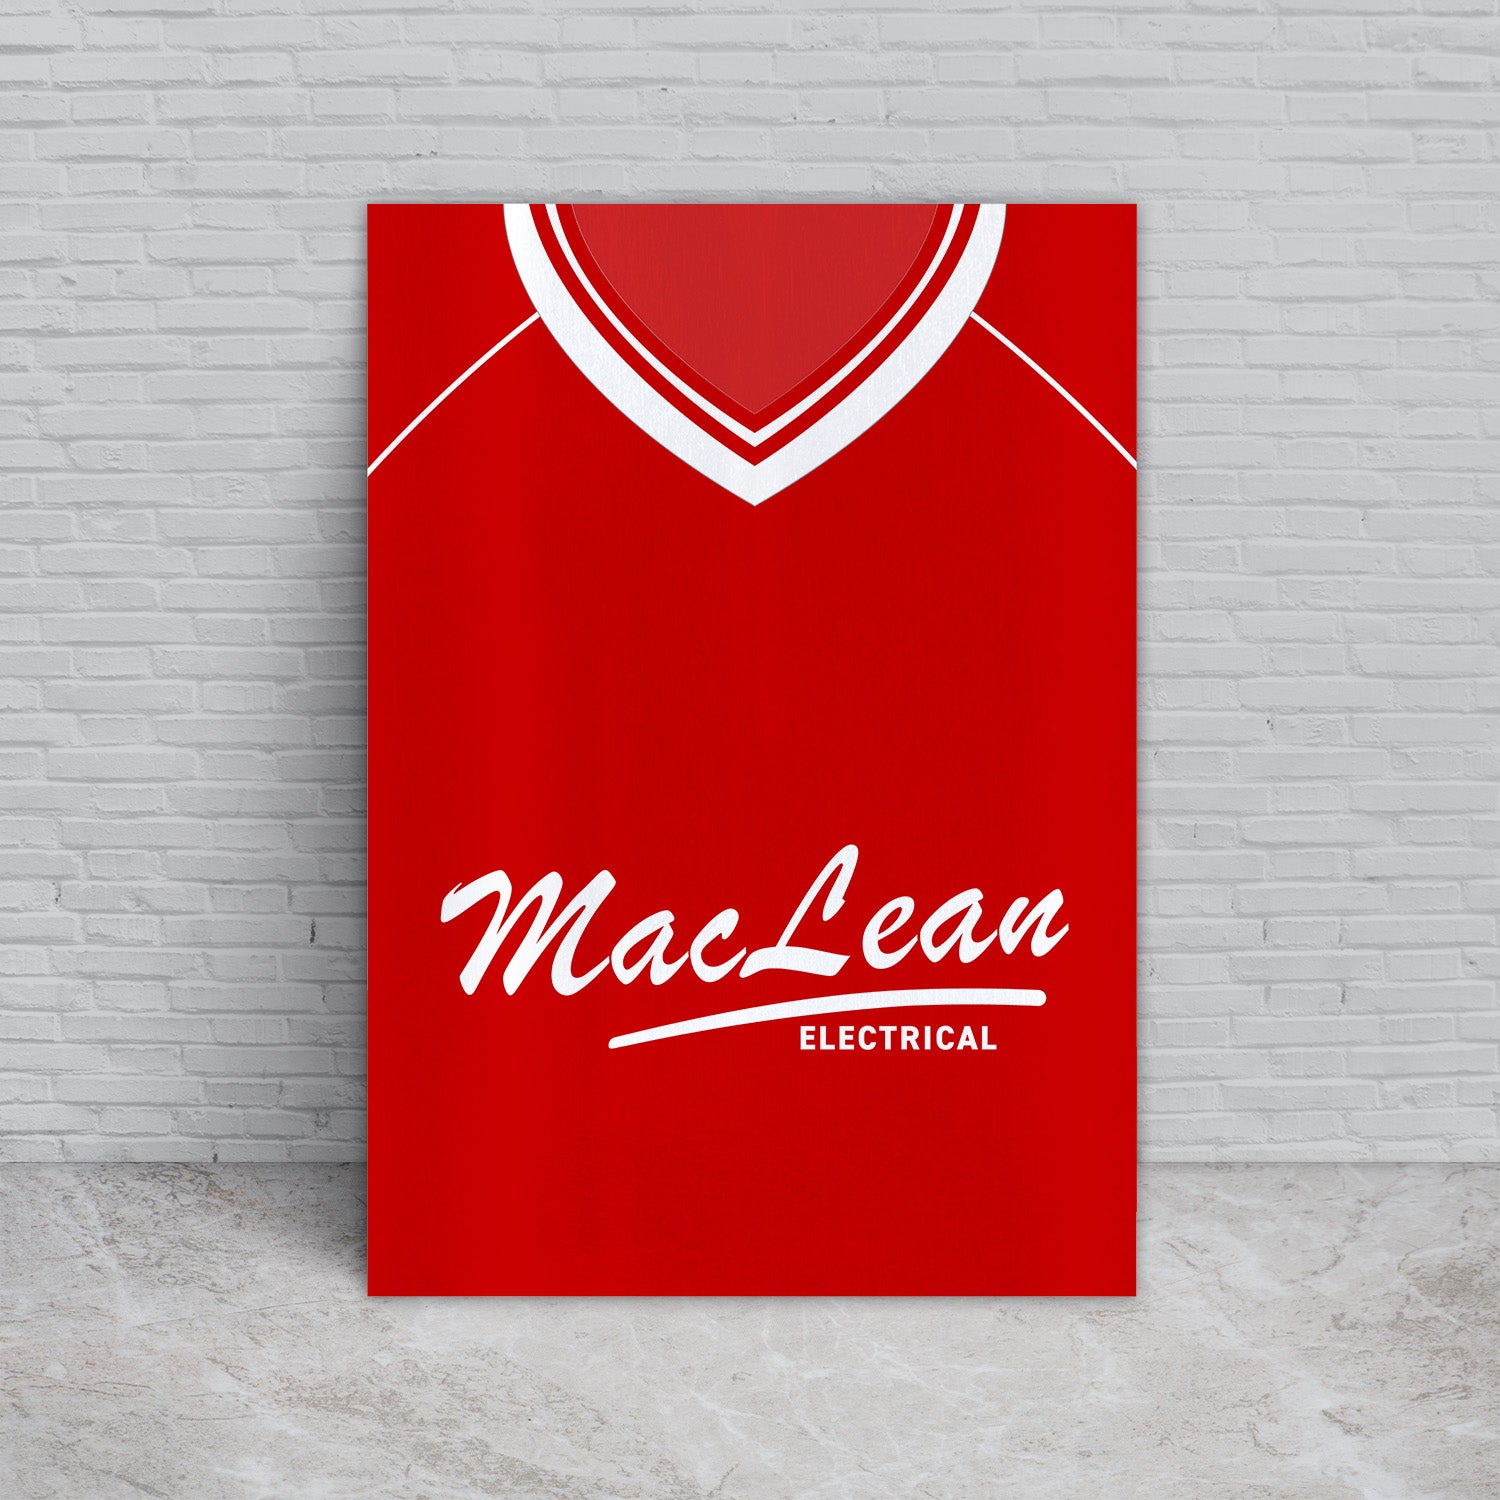 Ross County 2000 Away Shirt - A4 Personalised Metal Sign Plaque